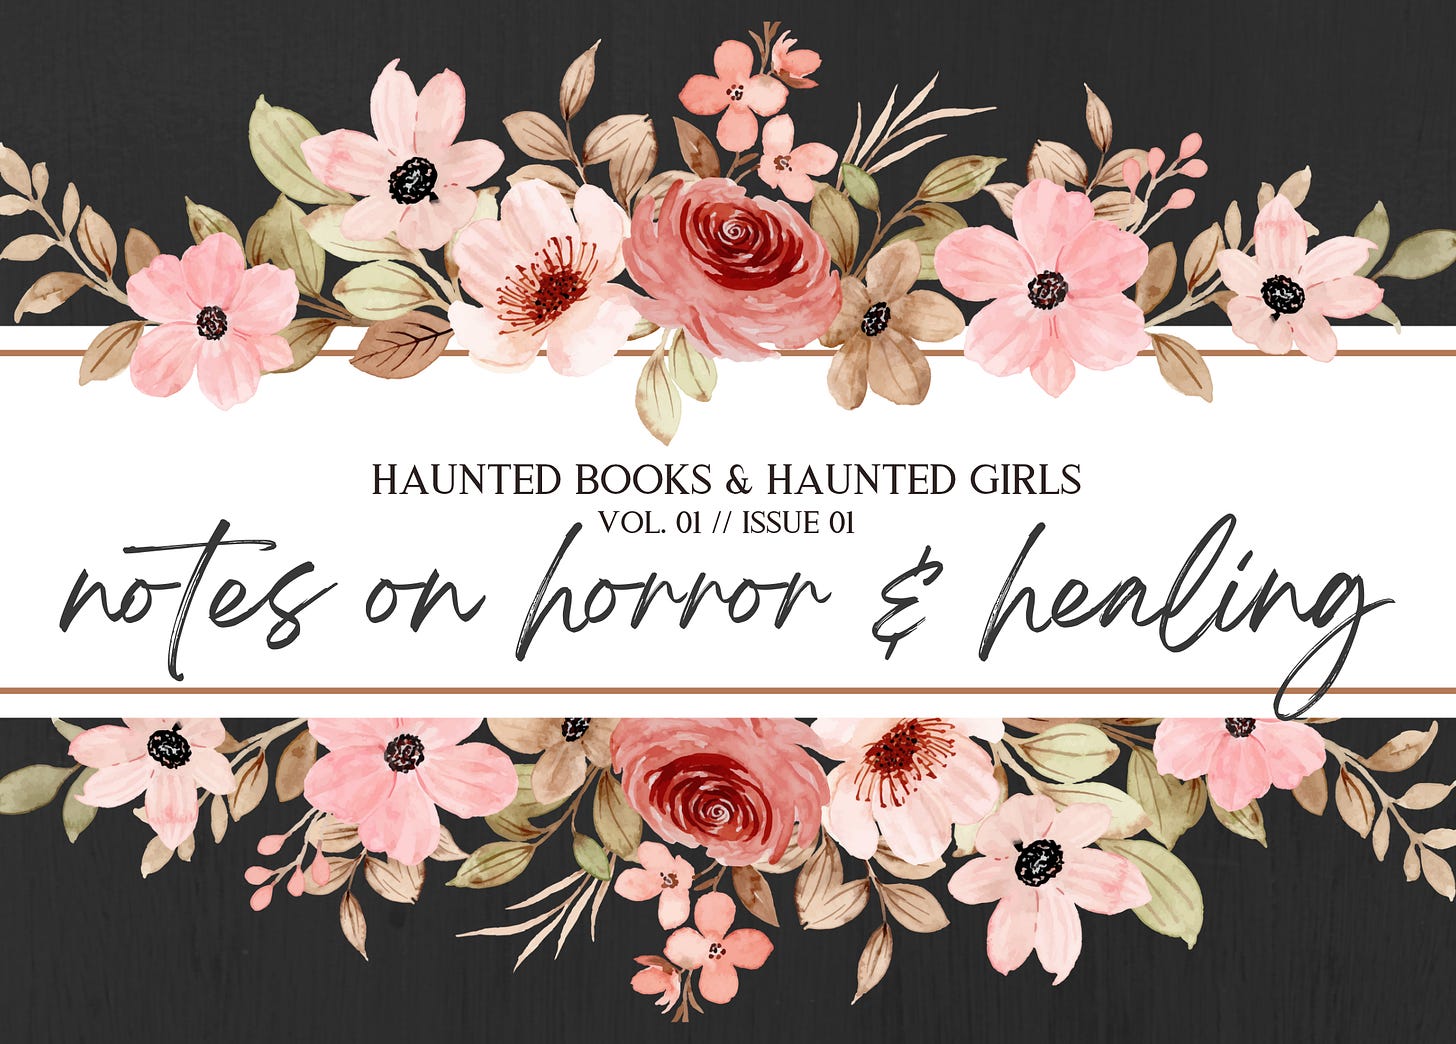 haunted books & haunted girls, vol 01, issue 01: notes on horror & healing